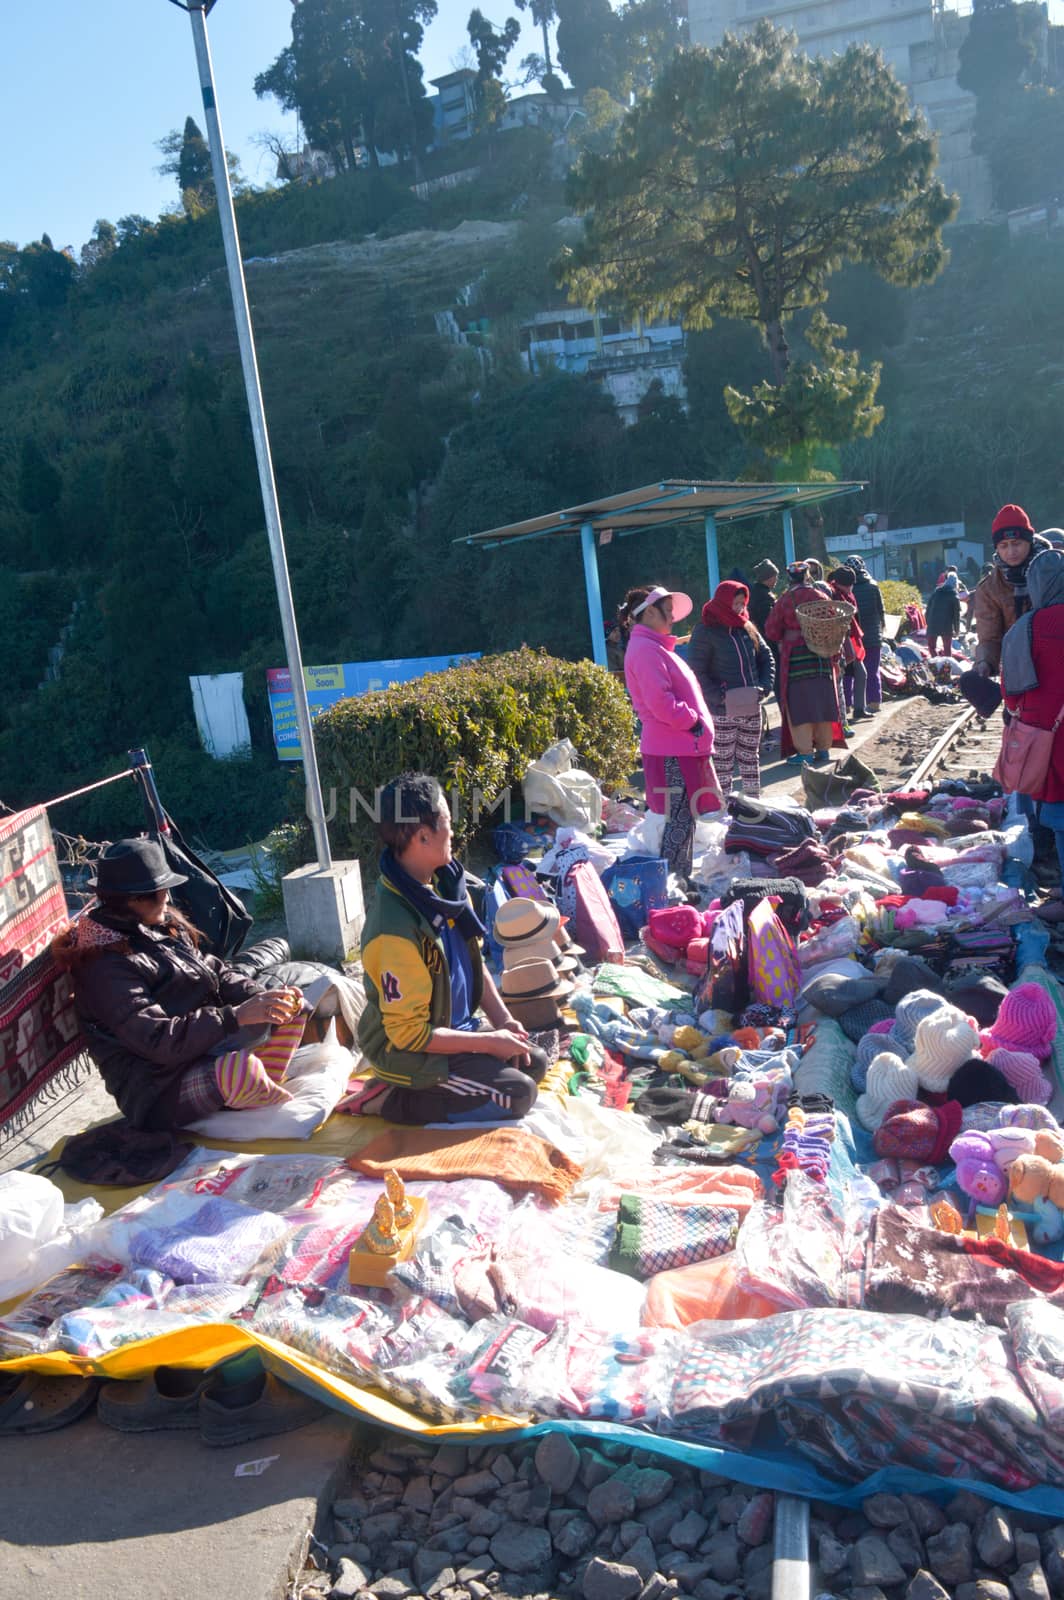 Batasia Loop, Darjeeling, 2 Jan 2019: Shopkeepers with their little makeshift stalls on the railway lines, wrap up their business with great agility and speed as the toy train arrives. by sudiptabhowmick